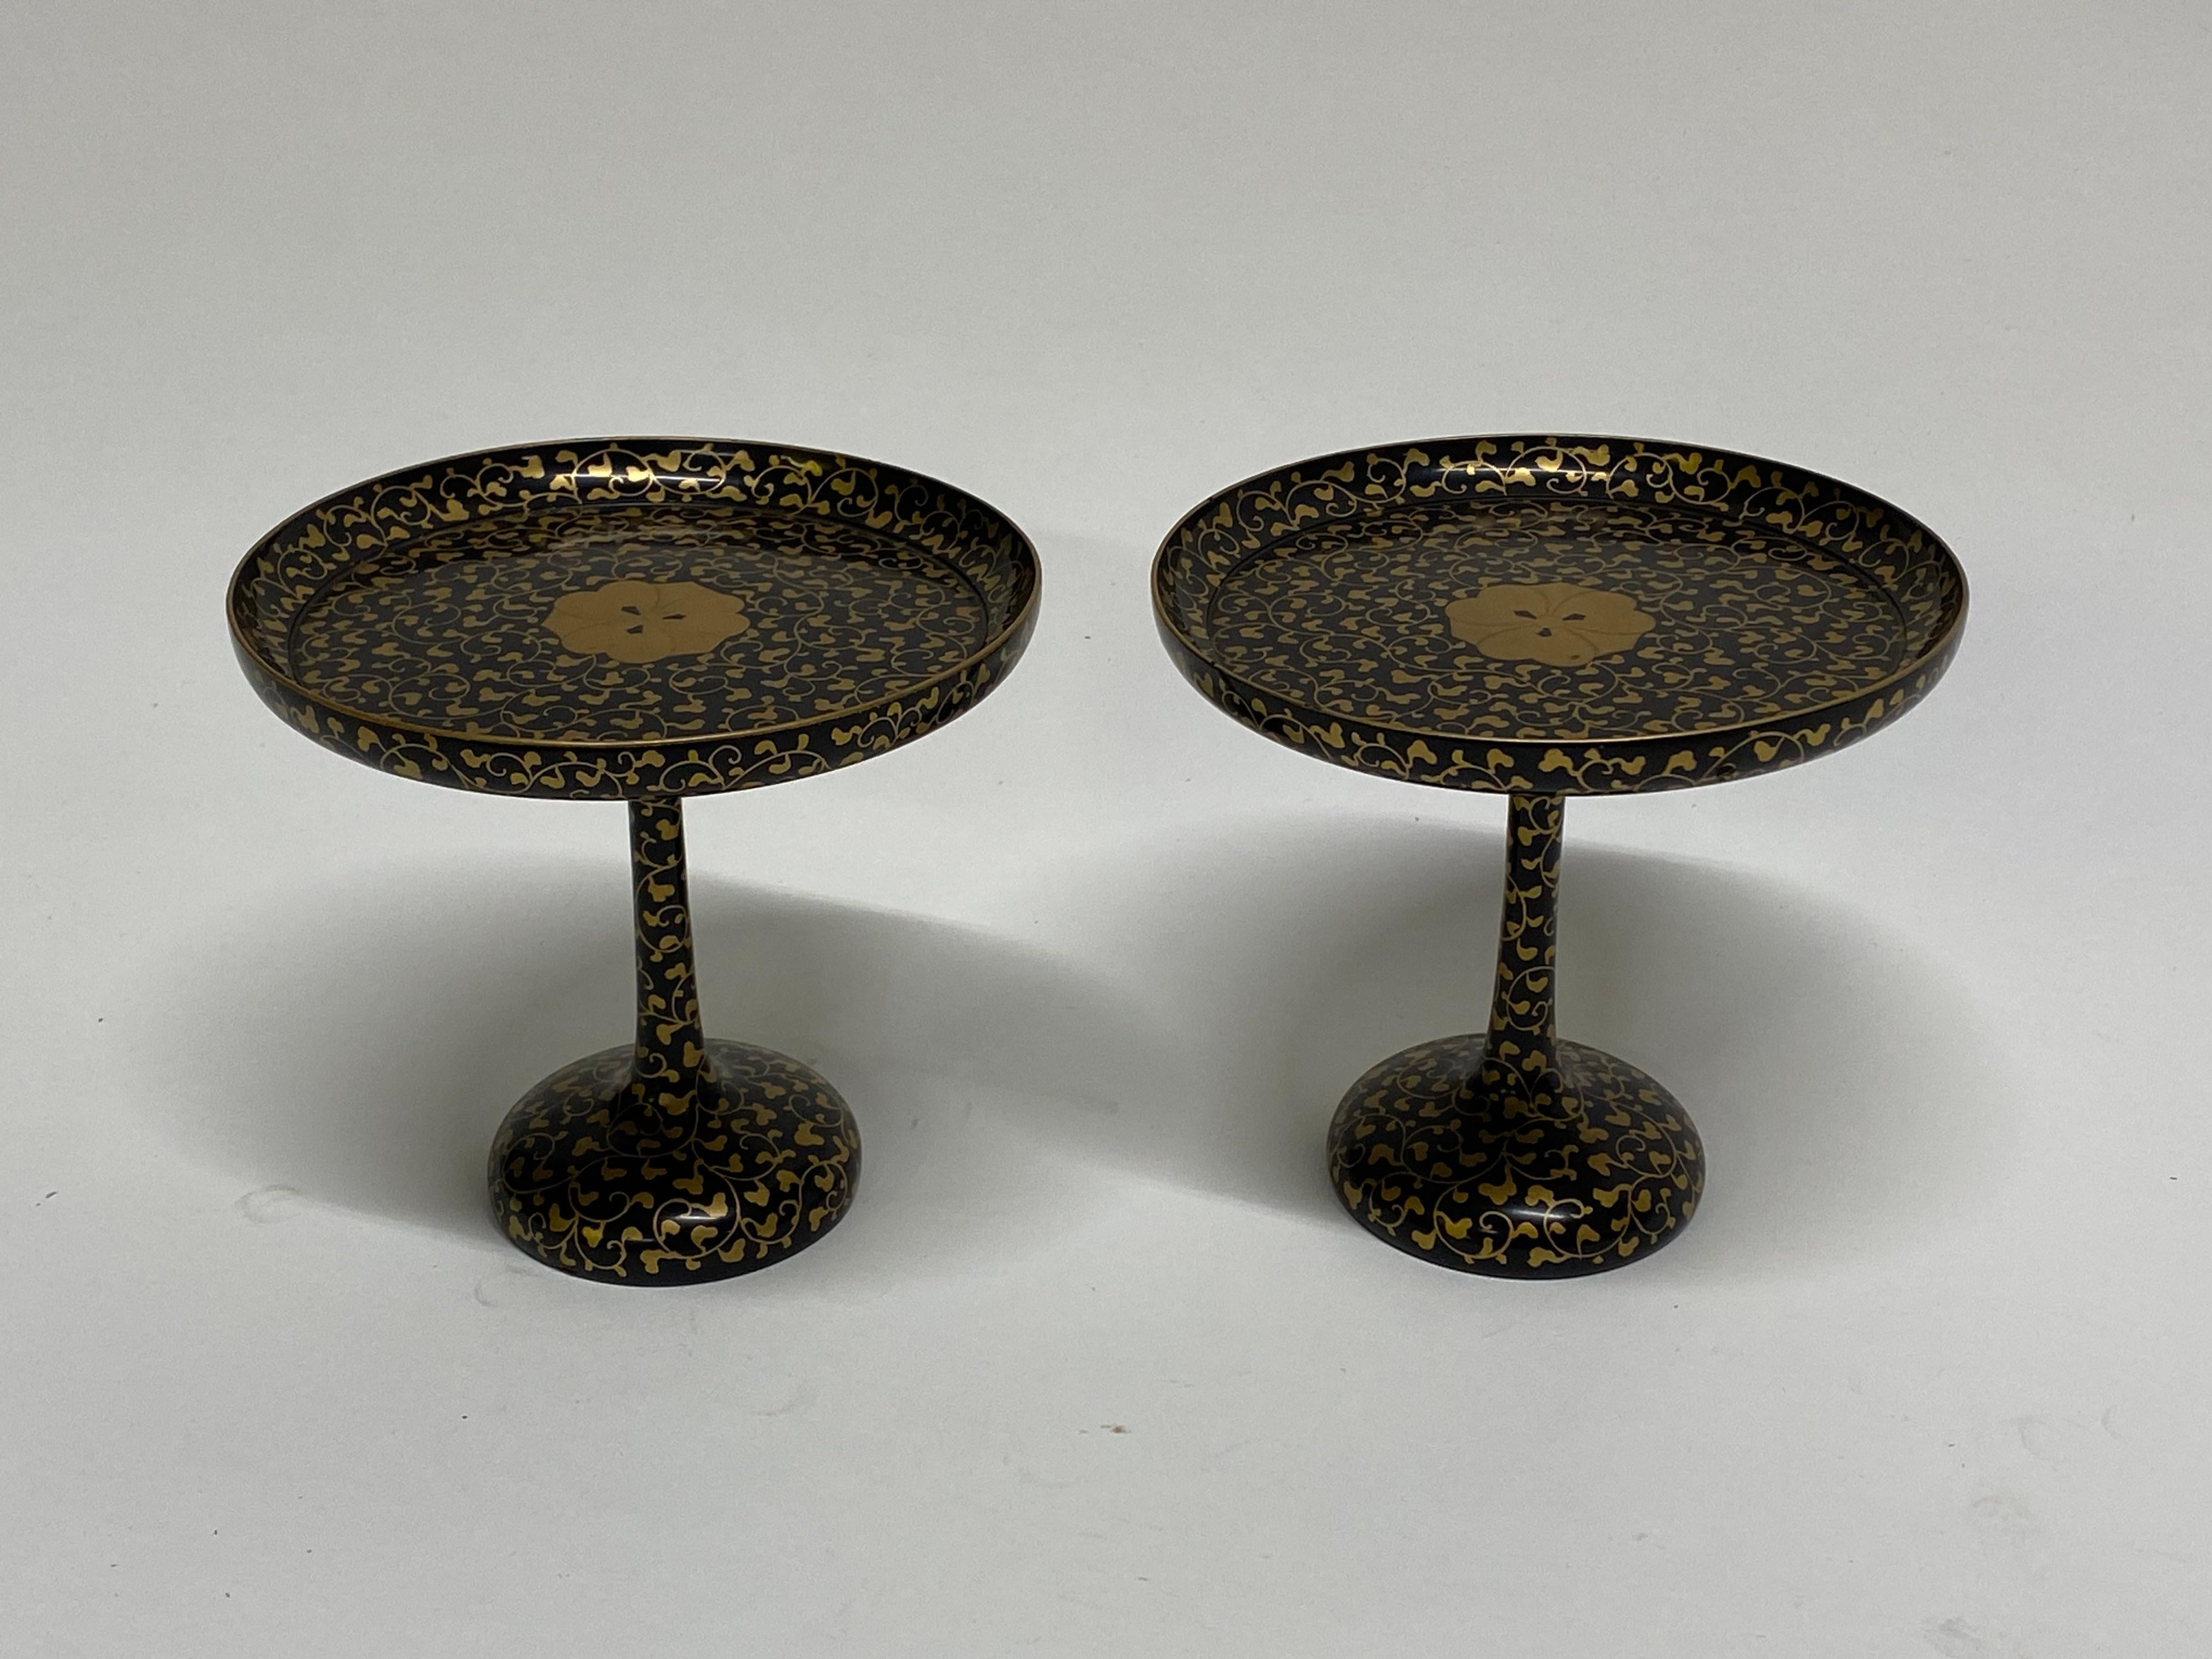 Japanese Asian Black Lacquerware and Gold Tazzas, A Pair For Sale